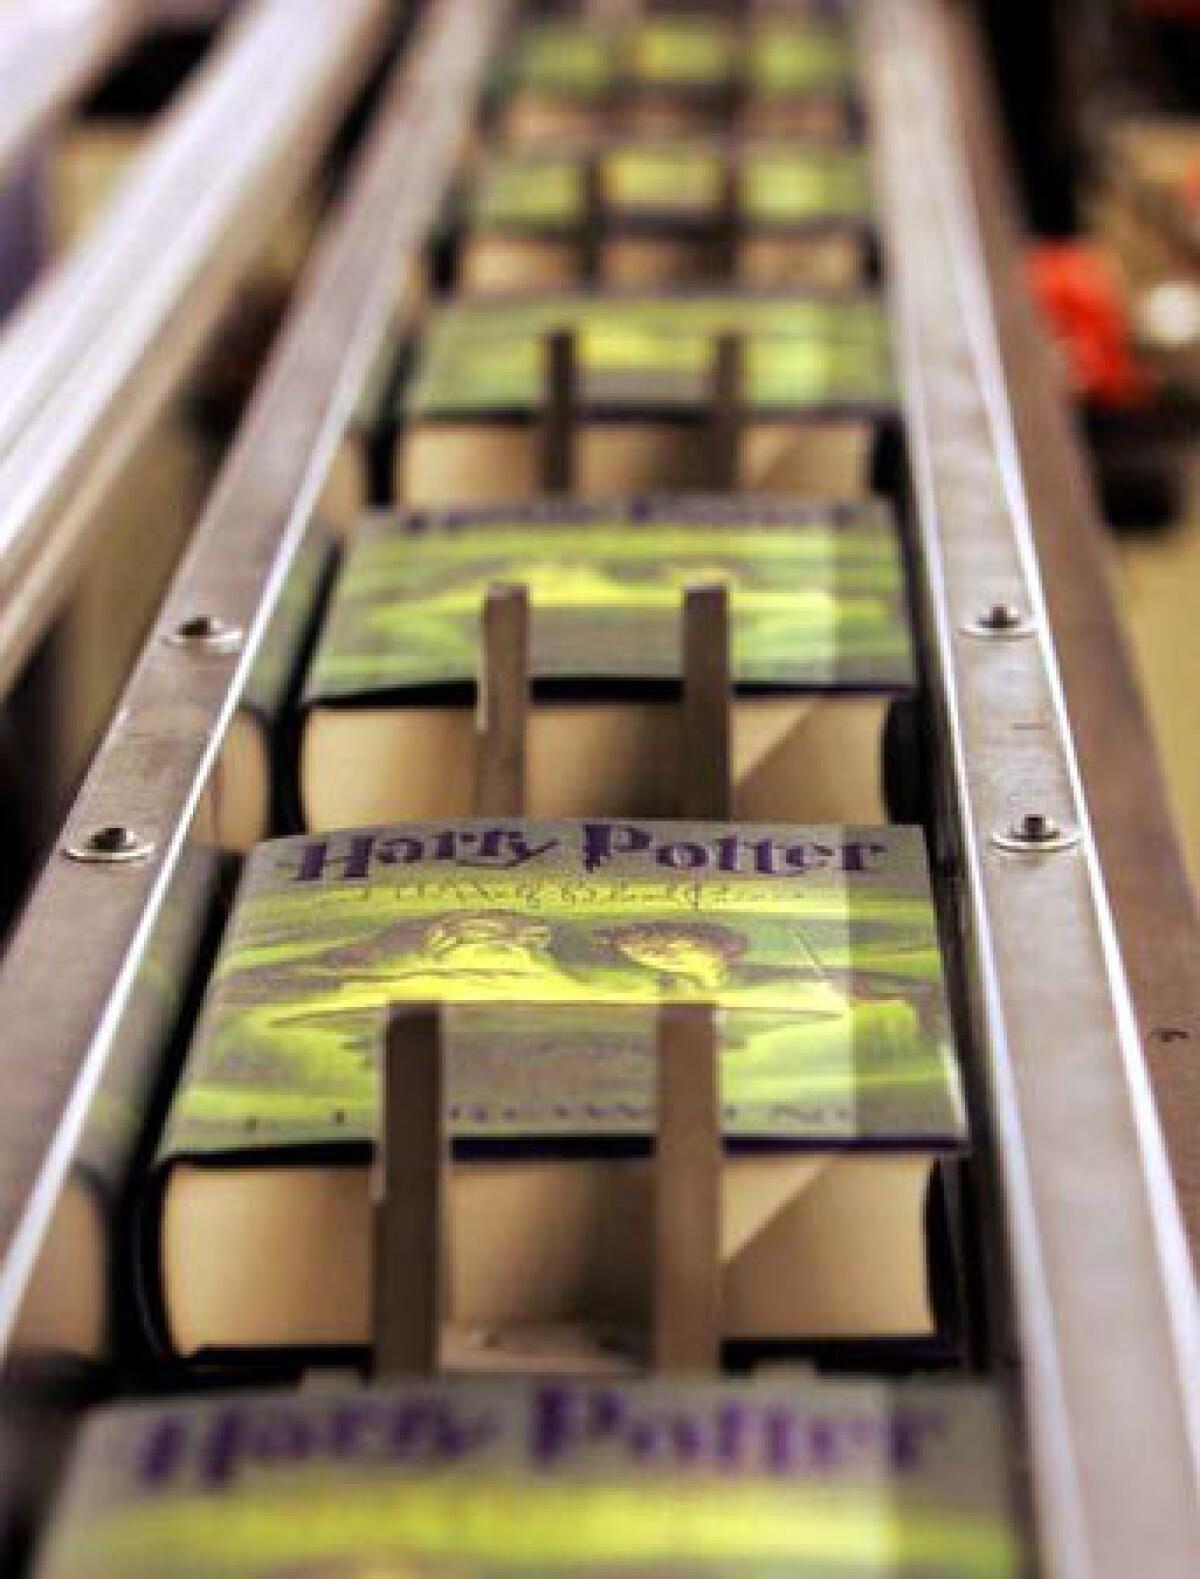 Amazon.com is packing over 800,000 orders of the latest Harry Potter book for shipment Saturday.